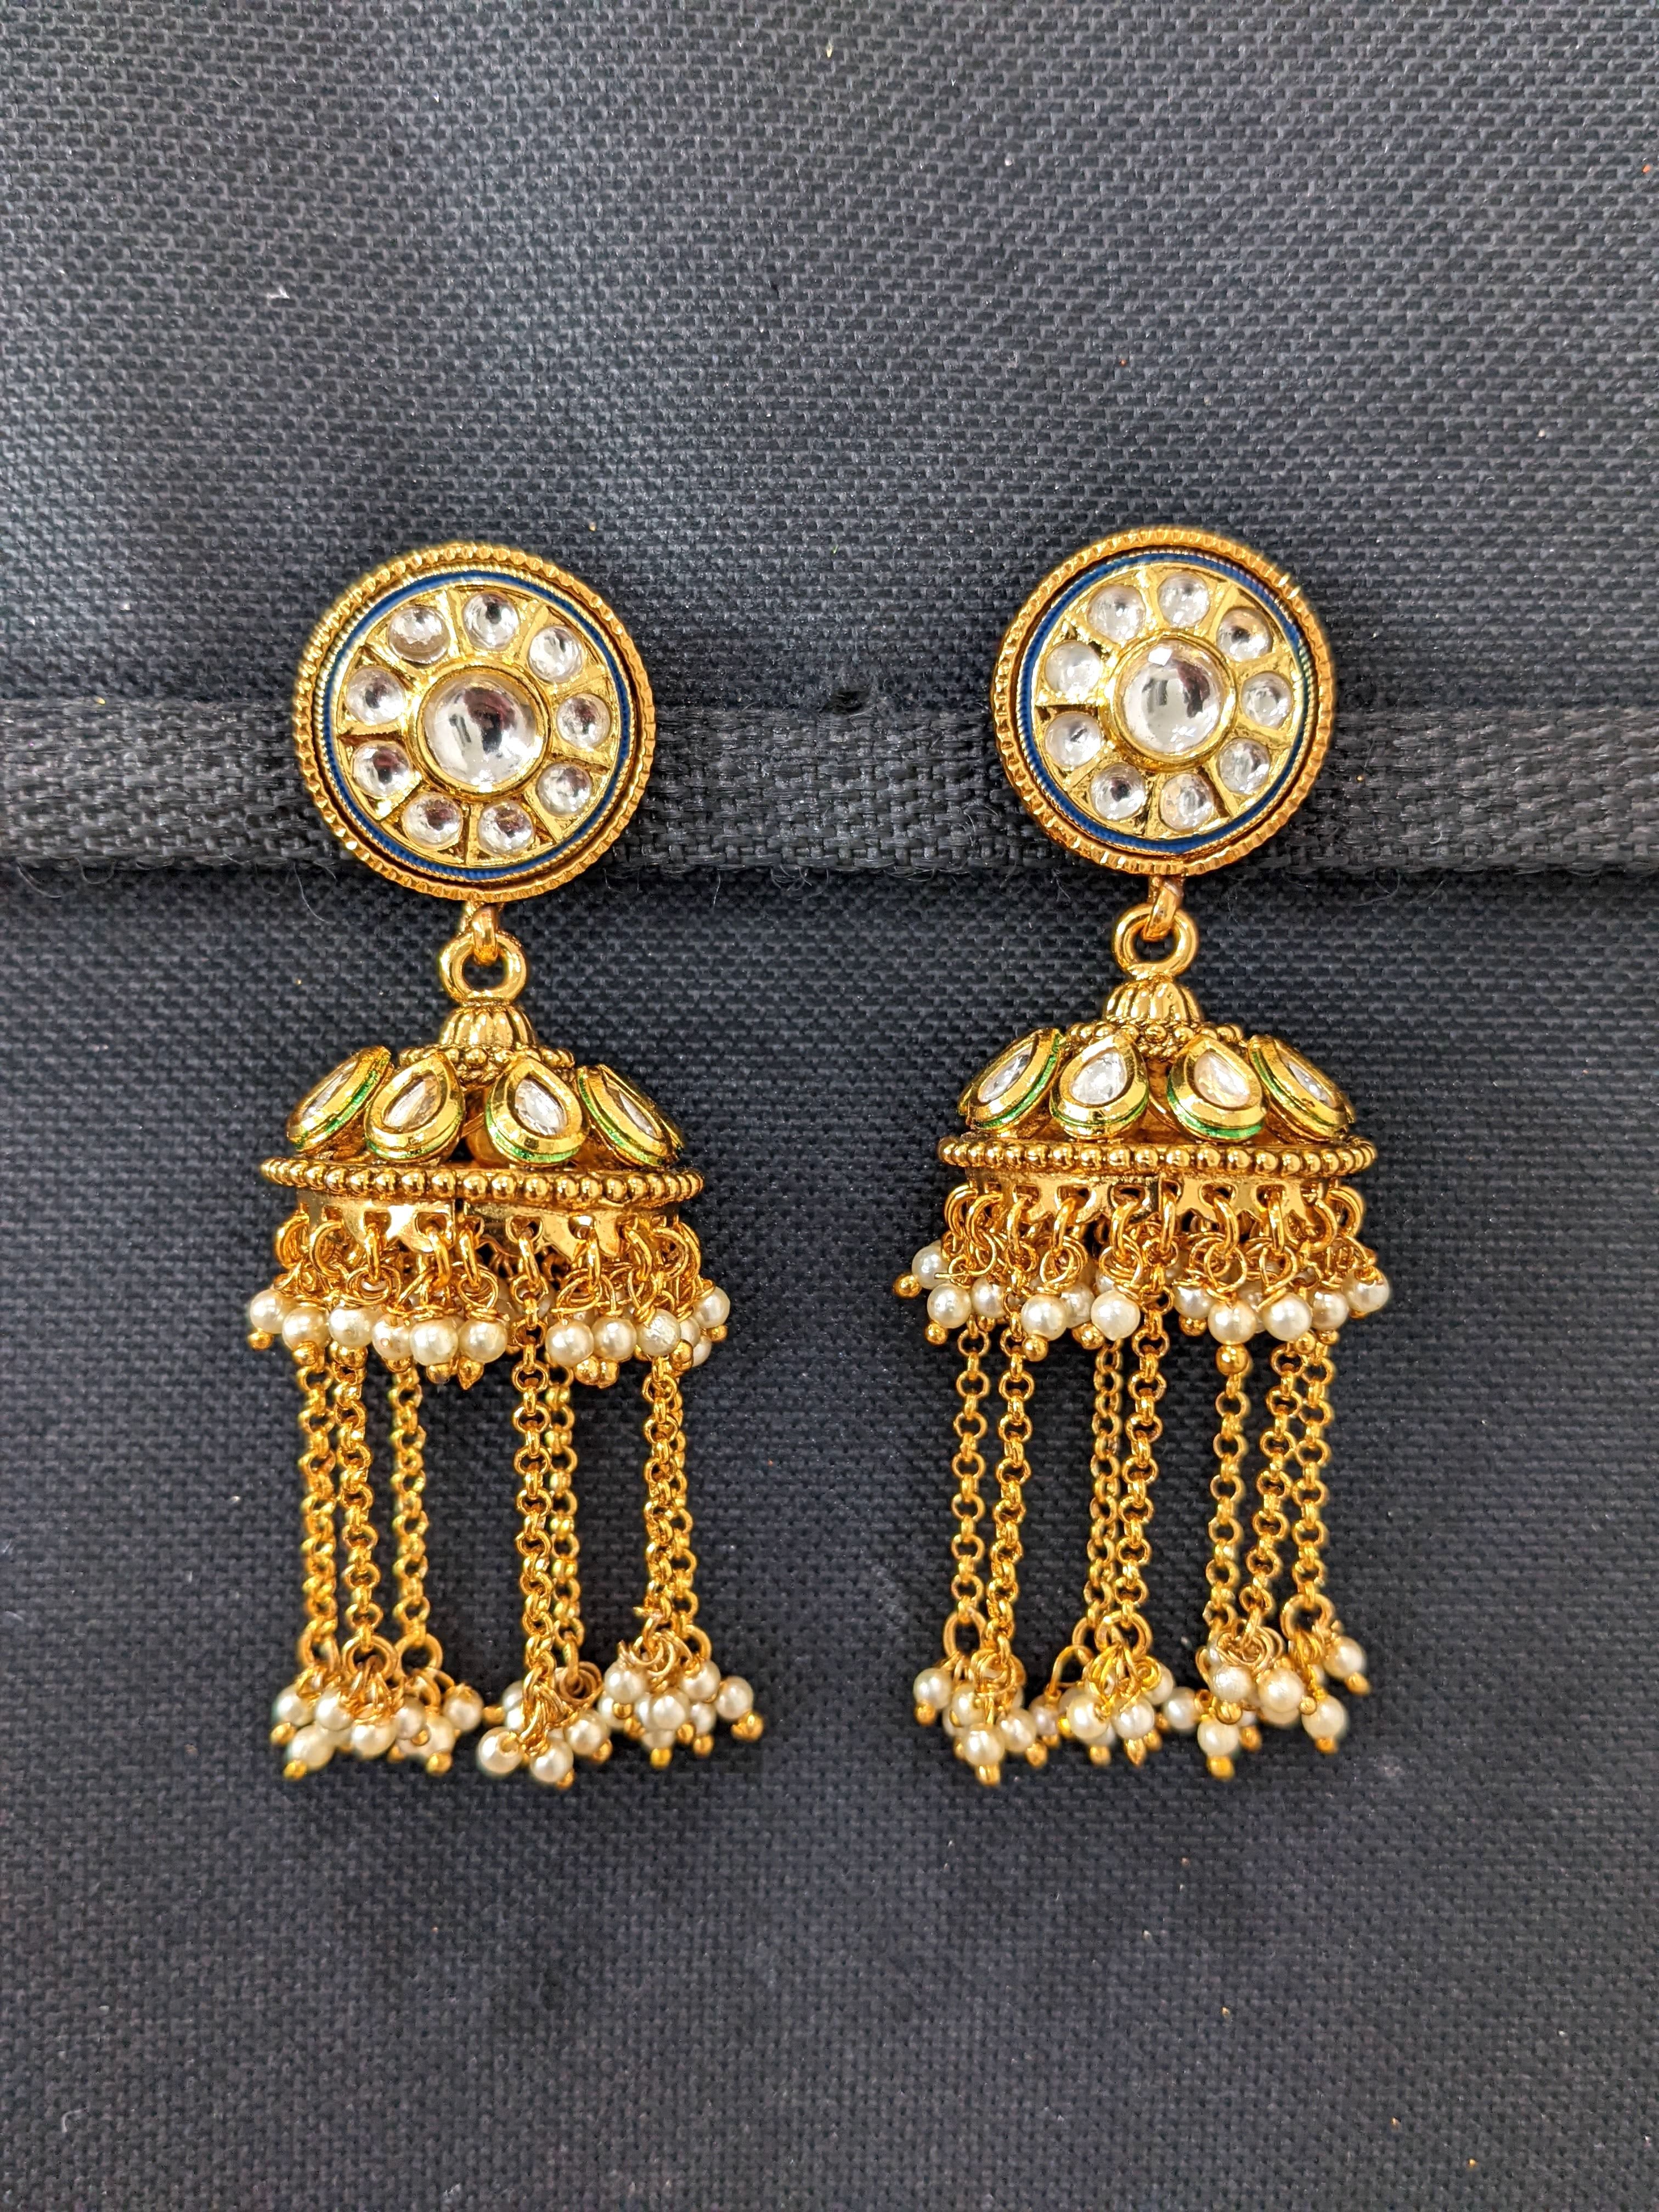 Gold jhumka | Gold jewellry designs, Gold earrings designs, Delicate gold  jewelry